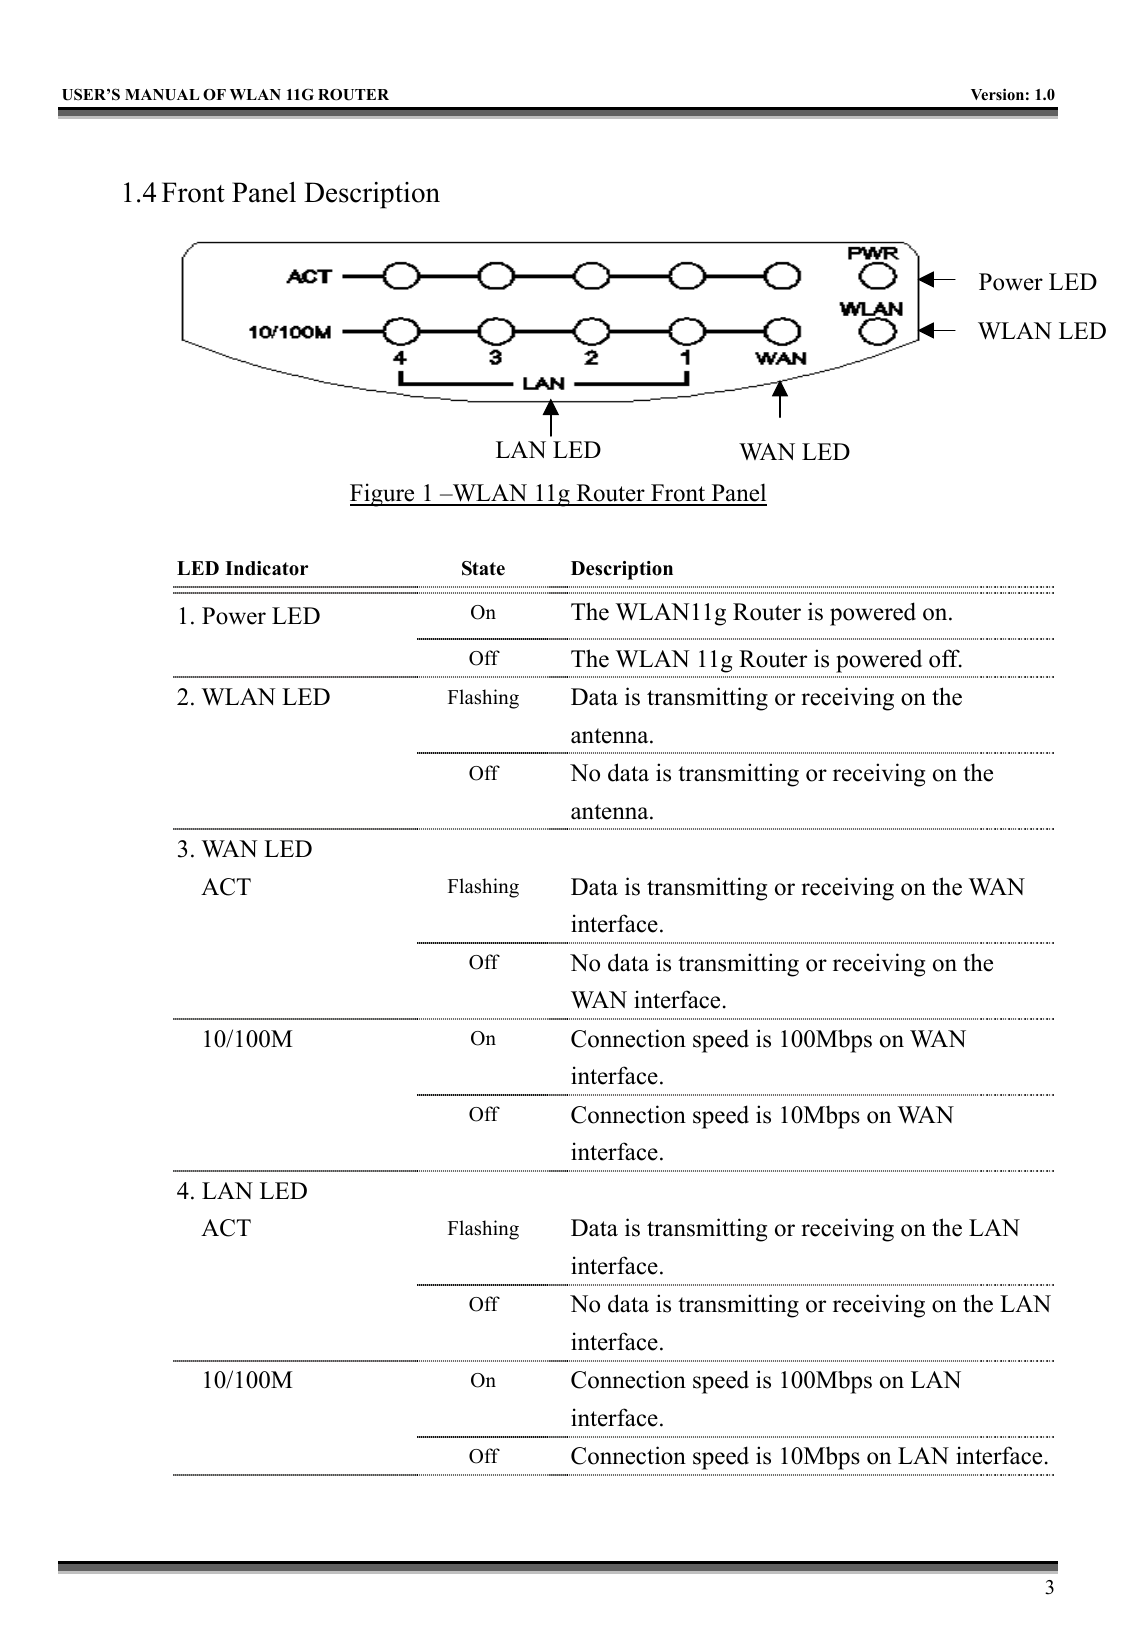   USER’S MANUAL OF WLAN 11G ROUTER    Version: 1.0     3  1.4 Front Panel Description   Figure 1 –WLAN 11g Router Front Panel  LED Indicator    State  Description 1. Power LED     On  The WLAN11g Router is powered on.   Off  The WLAN 11g Router is powered off. 2. WLAN LED   Flashing  Data is transmitting or receiving on the antenna.   Off  No data is transmitting or receiving on the antenna. 3. WAN LED      ACT   Flashing  Data is transmitting or receiving on the WAN interface.   Off  No data is transmitting or receiving on the WAN interface. 10/100M   On  Connection speed is 100Mbps on WAN interface.   Off  Connection speed is 10Mbps on WAN interface. 4. LAN LED      ACT   Flashing  Data is transmitting or receiving on the LAN interface.   Off  No data is transmitting or receiving on the LAN interface. 10/100M   On  Connection speed is 100Mbps on LAN interface.   Off  Connection speed is 10Mbps on LAN interface.WAN LED LAN LEDPower LEDWLAN LED